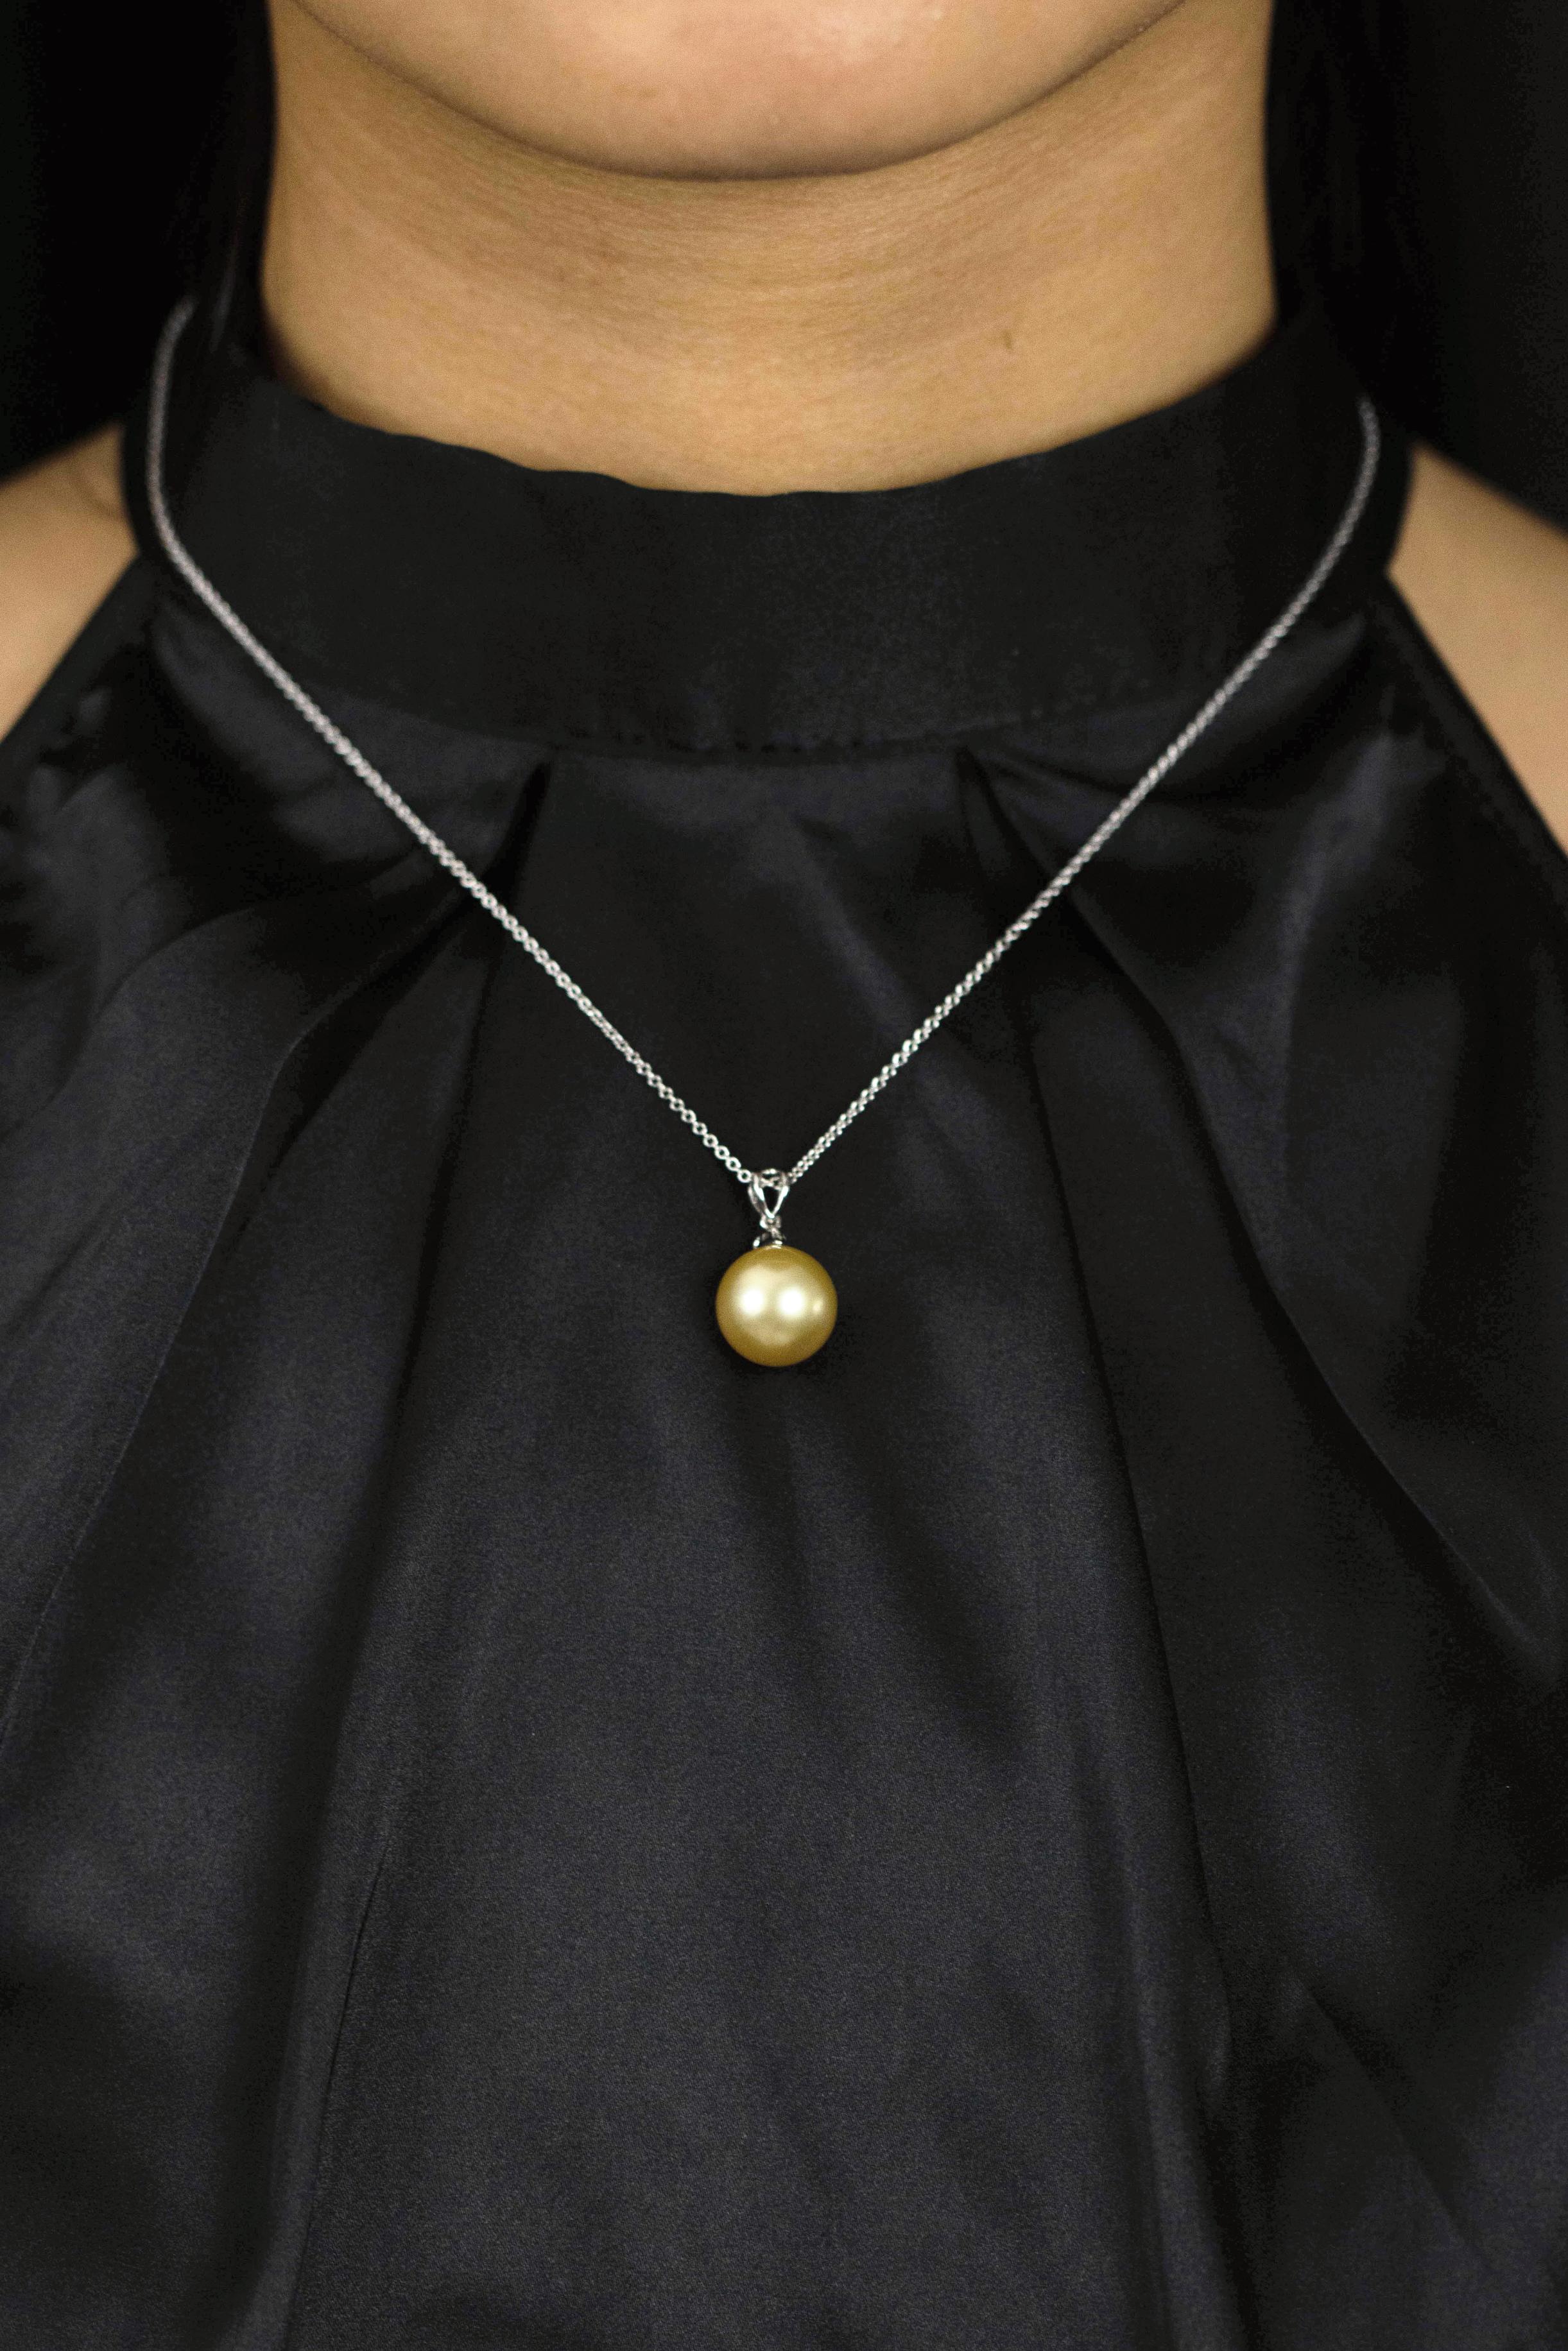 This beautiful pearl necklace showcasing an 12 millimeter south sea pearl of golden color. Accented with a single round diamond weighing 0.16 carats. Suspended on an 18 inch adjustable white gold chain.

Style available with matching earrings.